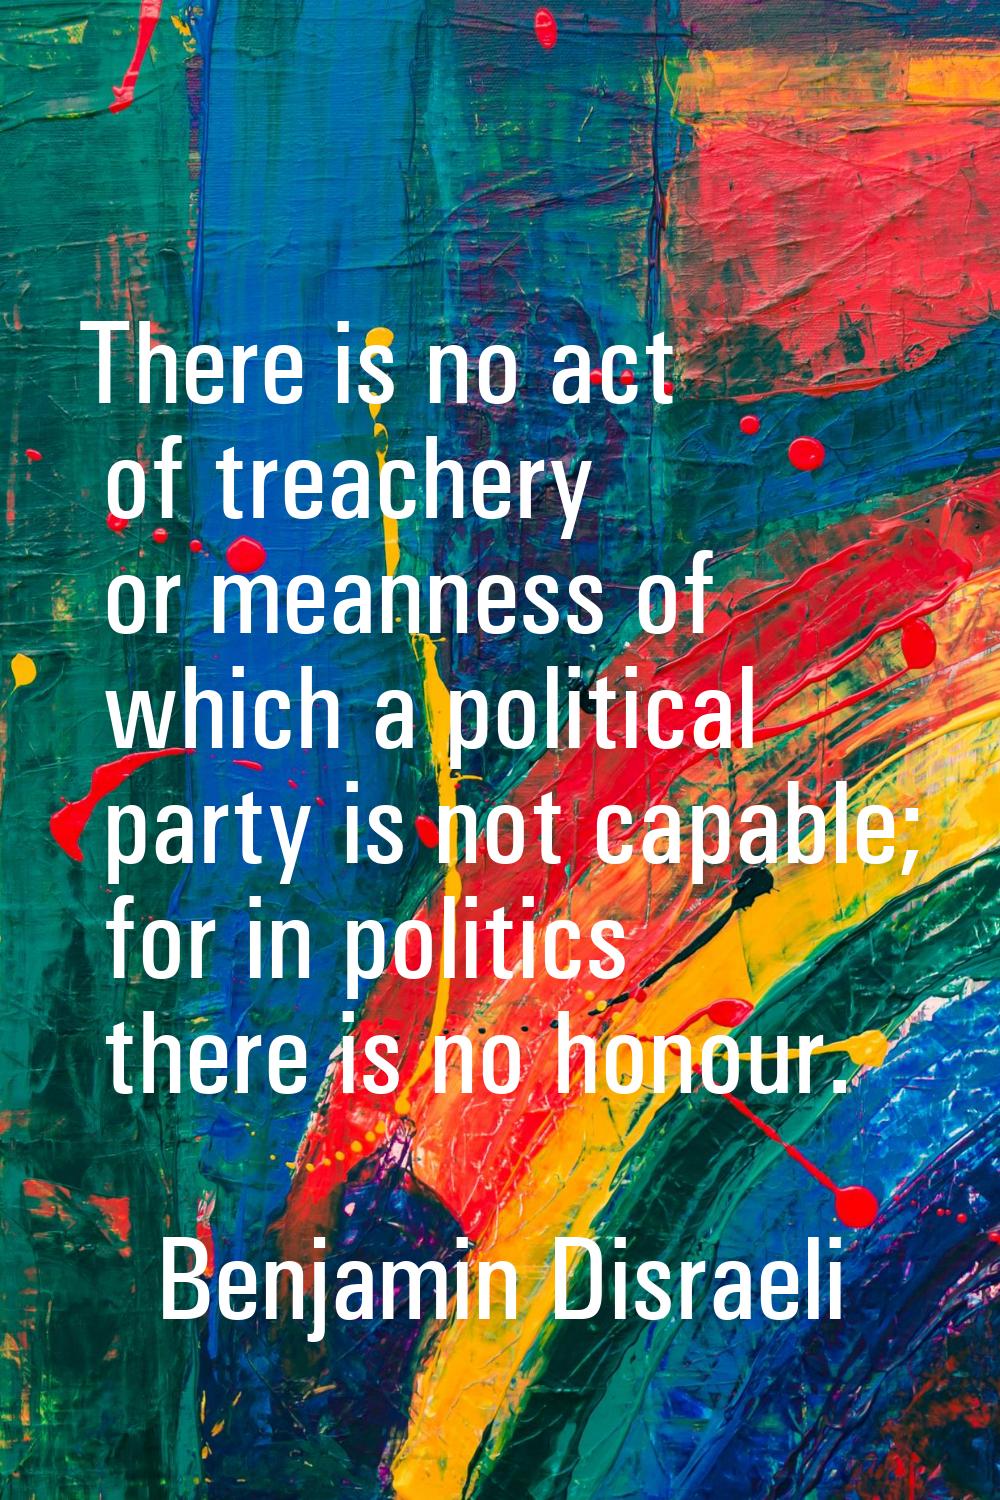 There is no act of treachery or meanness of which a political party is not capable; for in politics